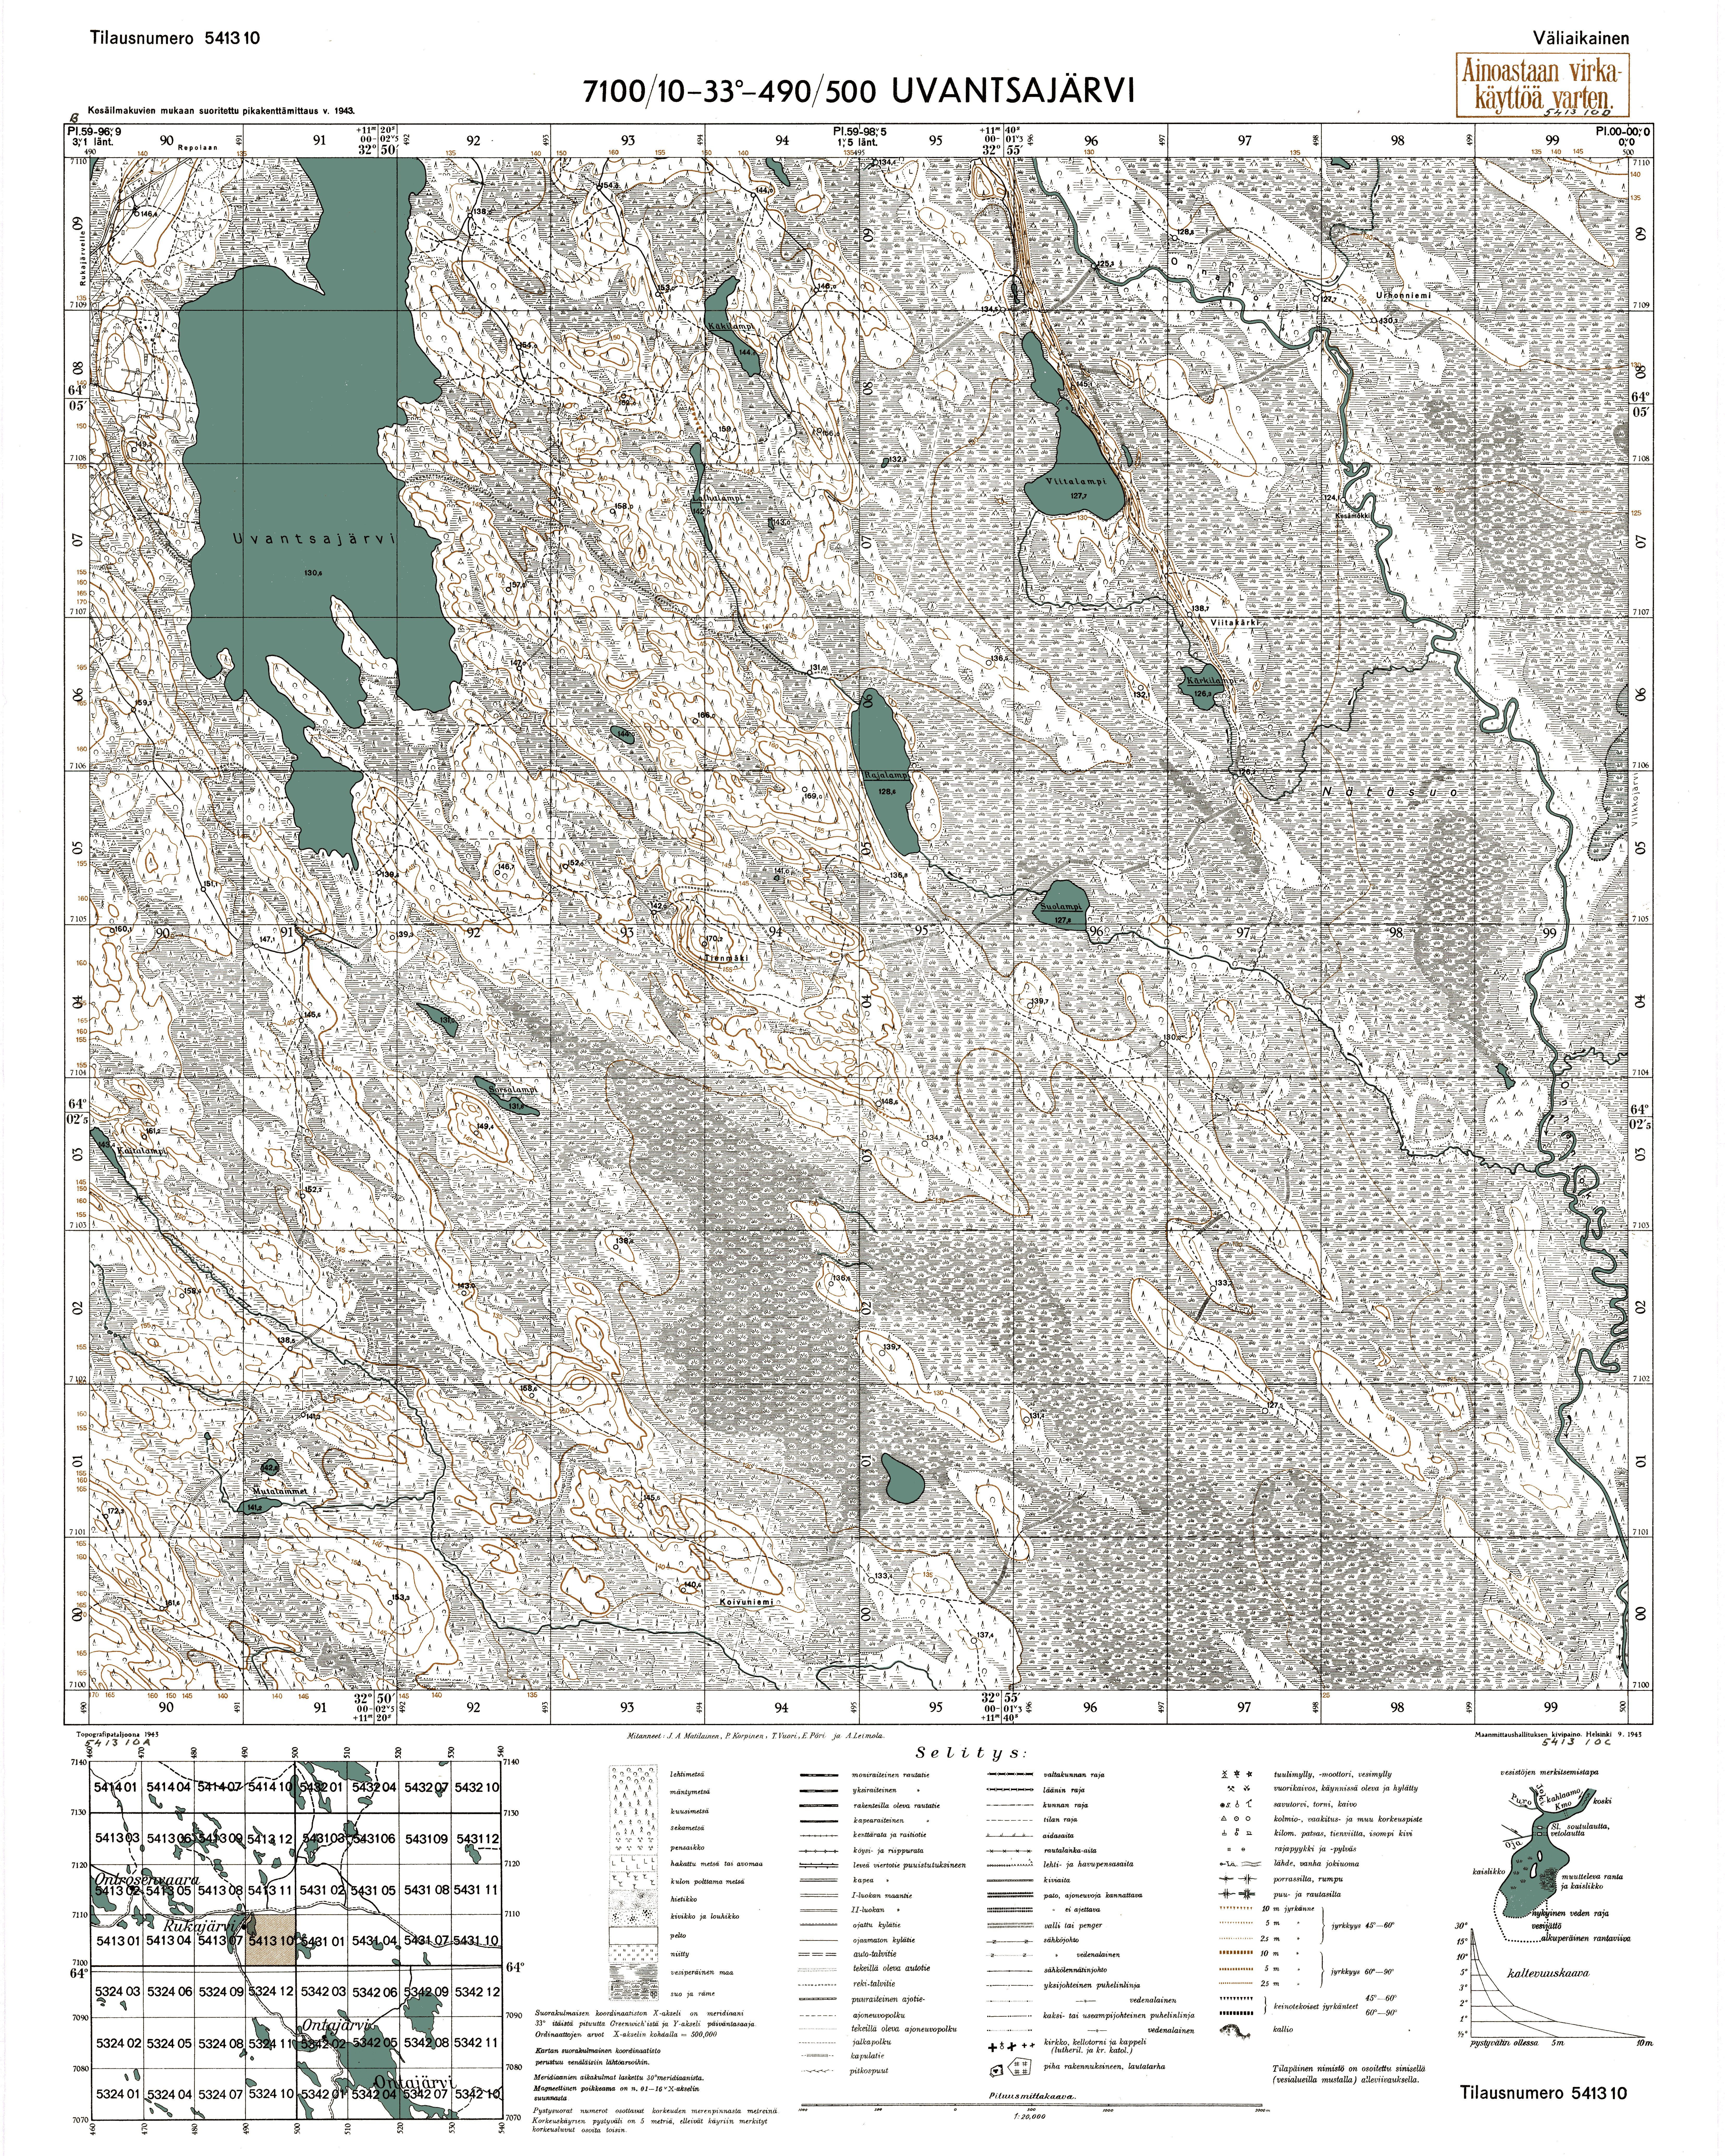 Vantšozero Lake. Uvantsajärvi. Topografikartta 541310. Topographic map from 1943. Use the zooming tool to explore in higher level of detail. Obtain as a quality print or high resolution image